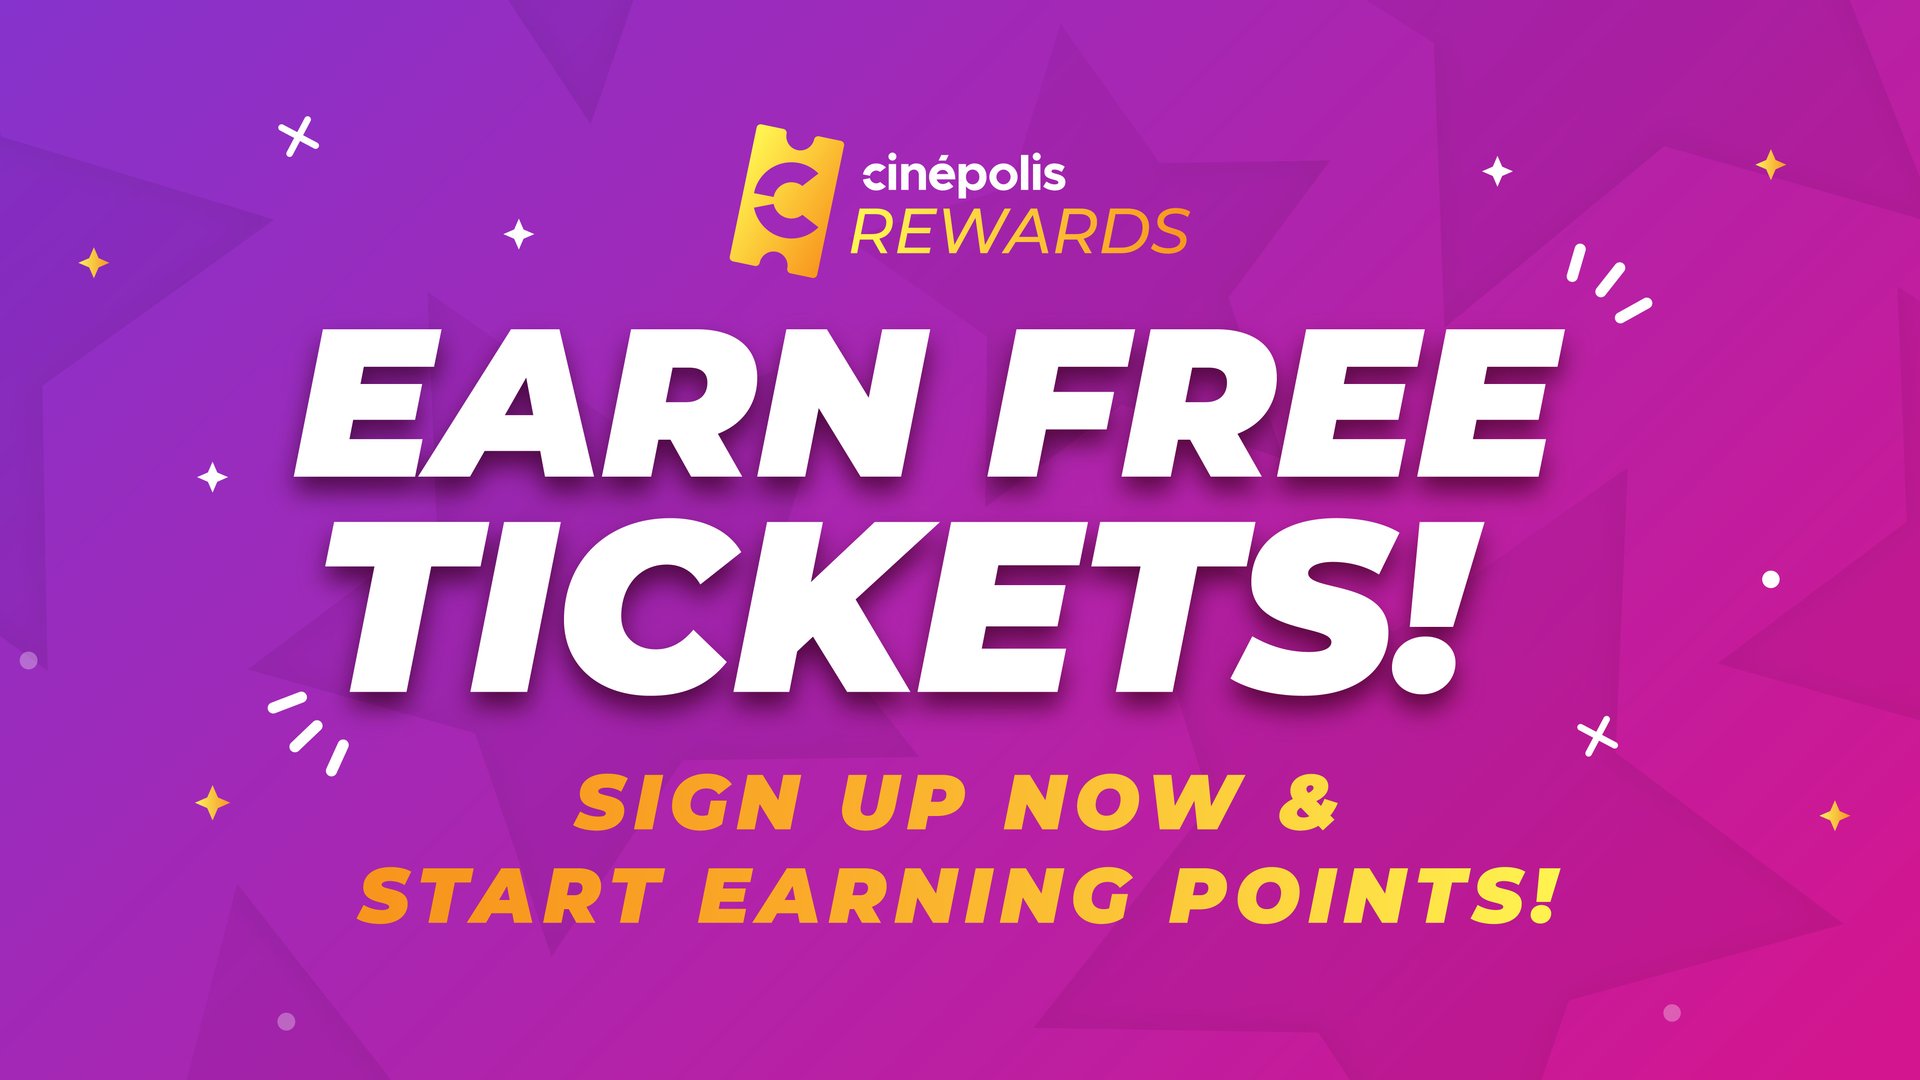 Join Cinepolis Rewards to earn free tickets!